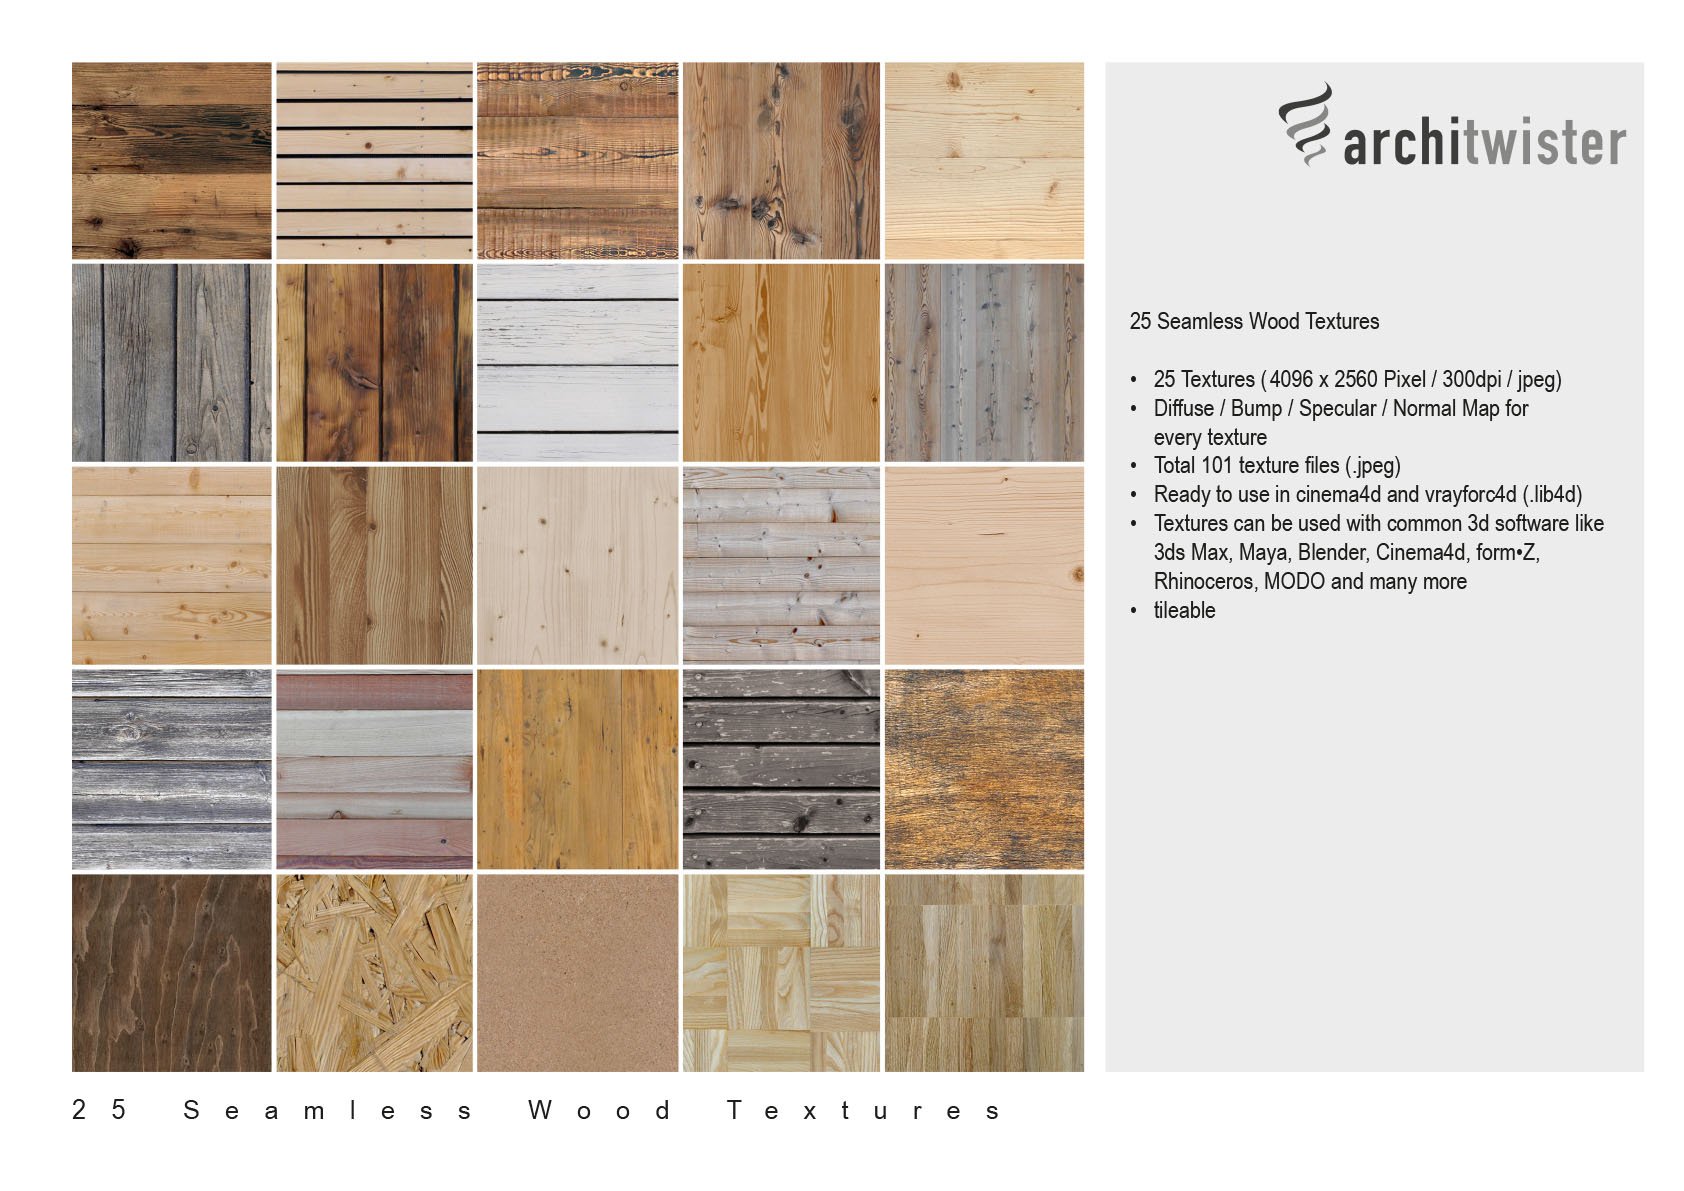 25 Seamless Wood Textures preview image.